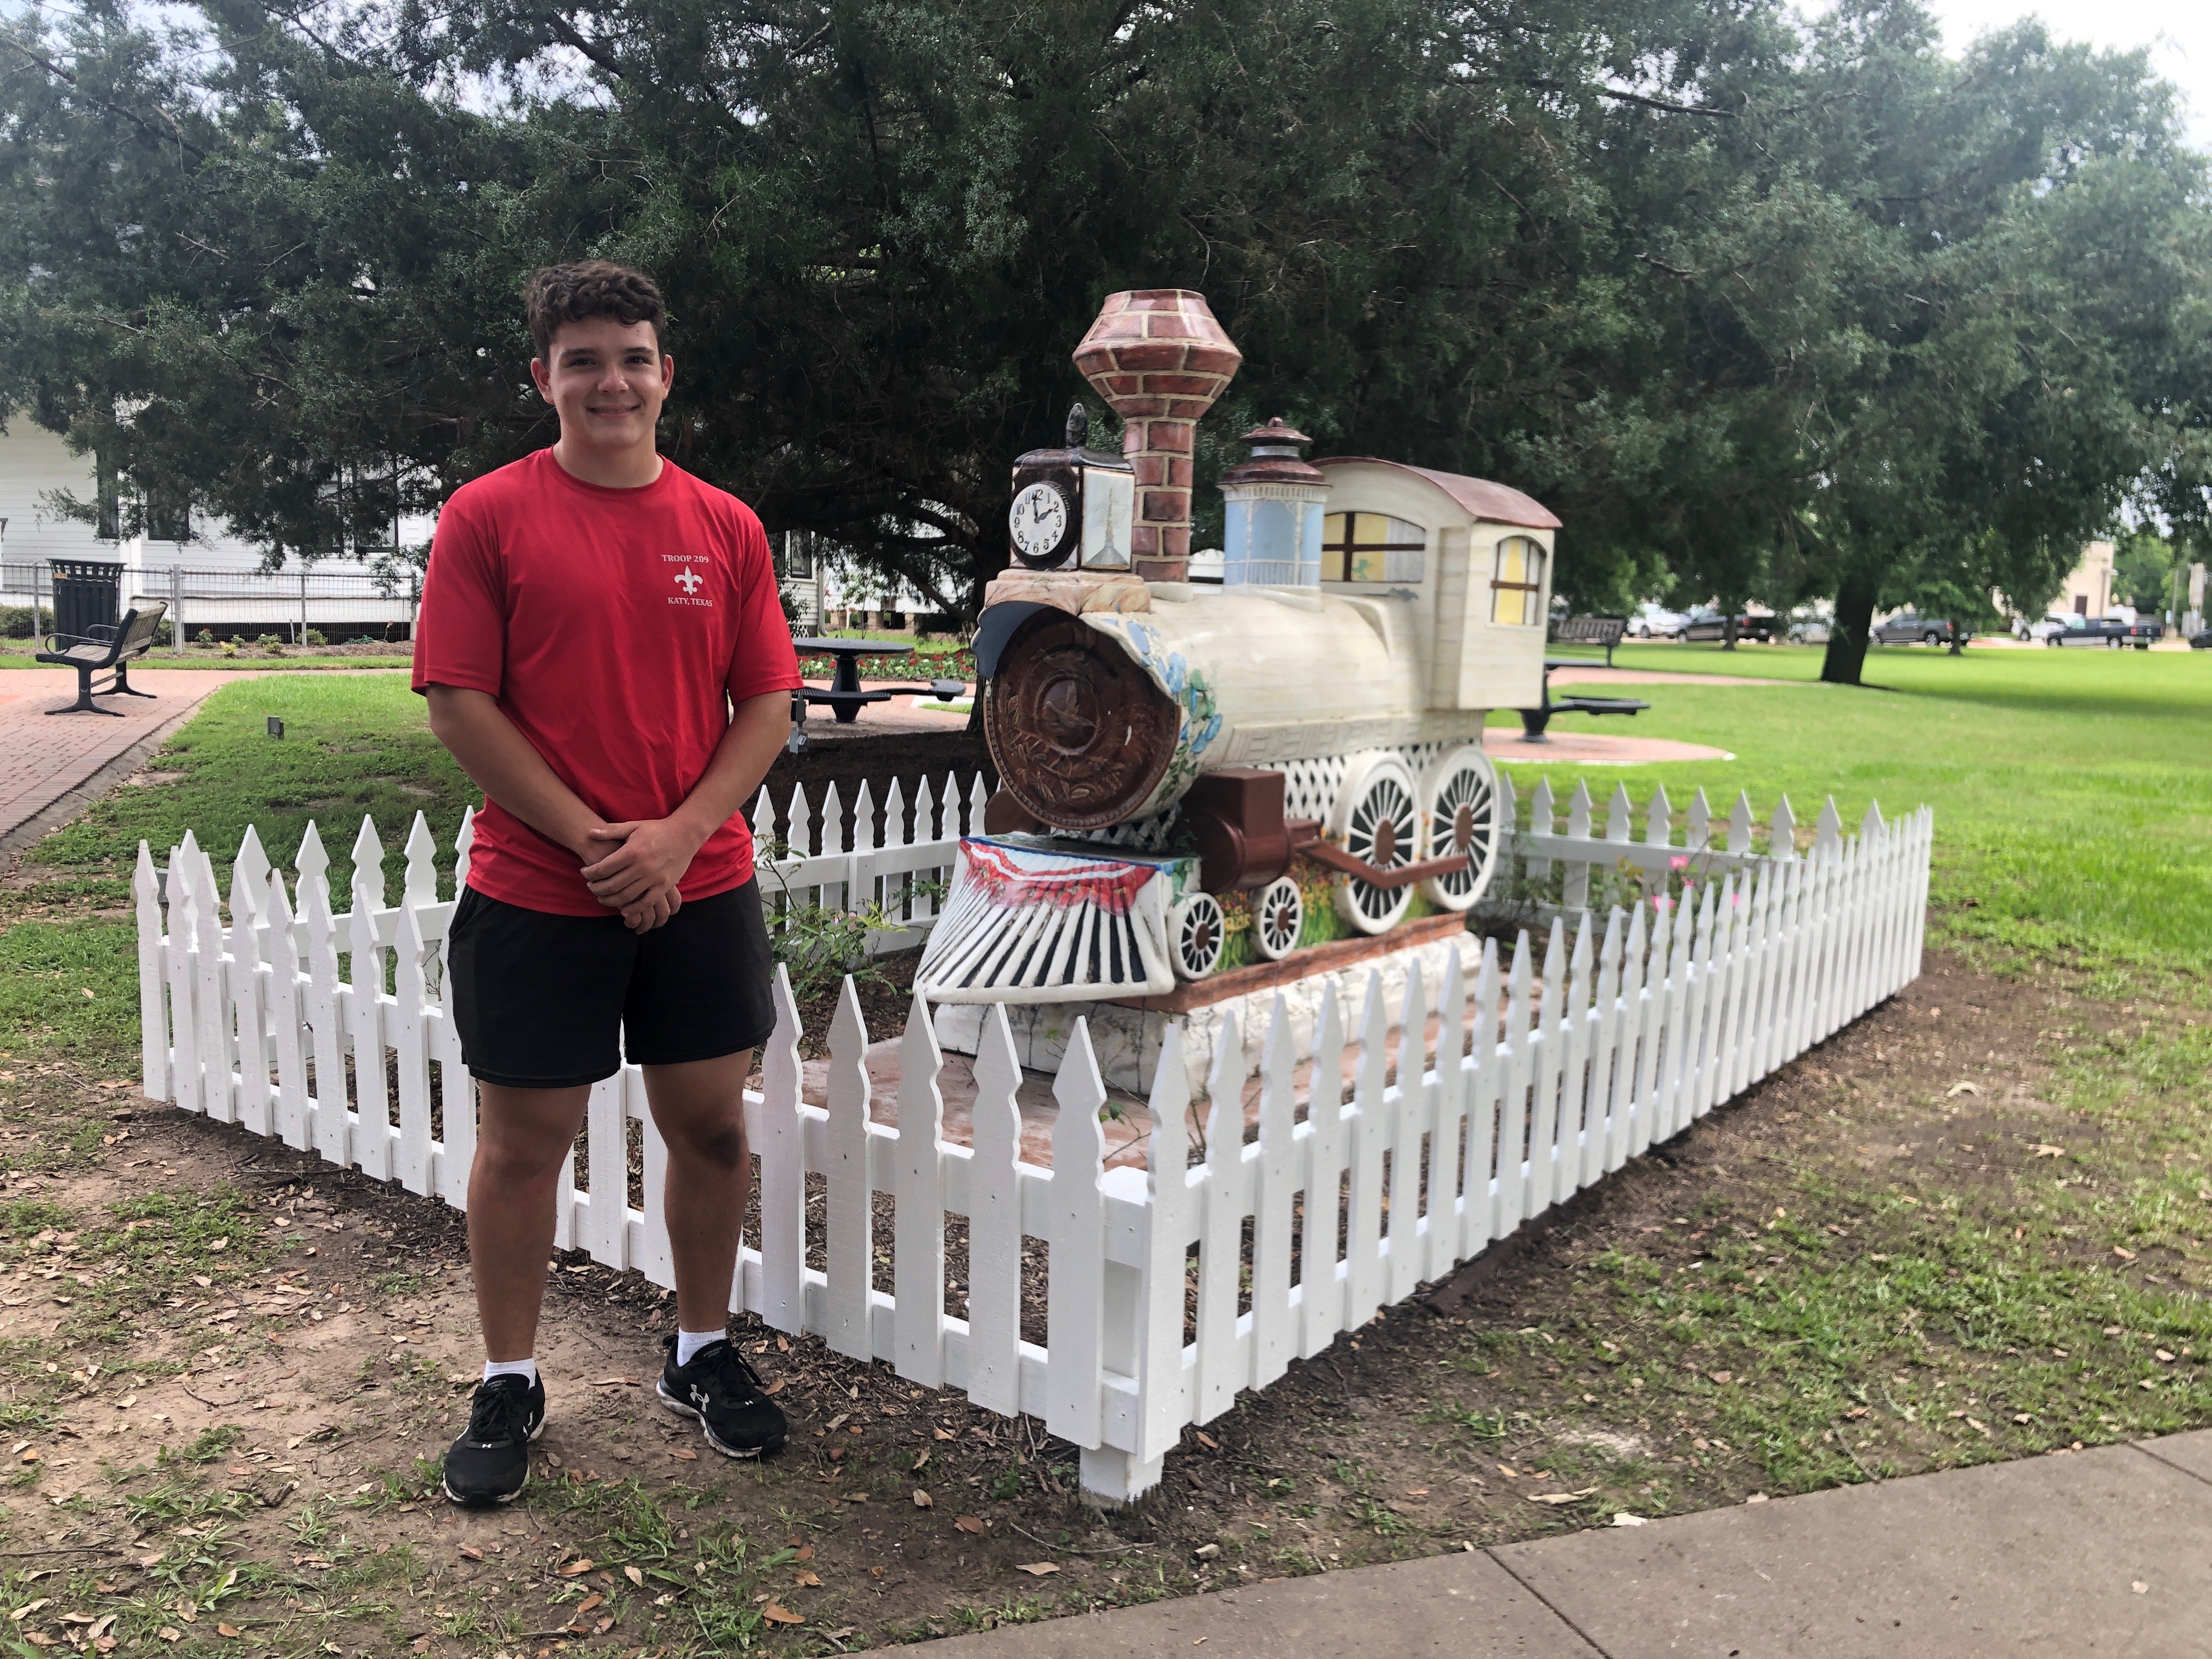 Katy Area Boy Scout Completes Eagle Scout Project Benefitting Katy Heritage Society